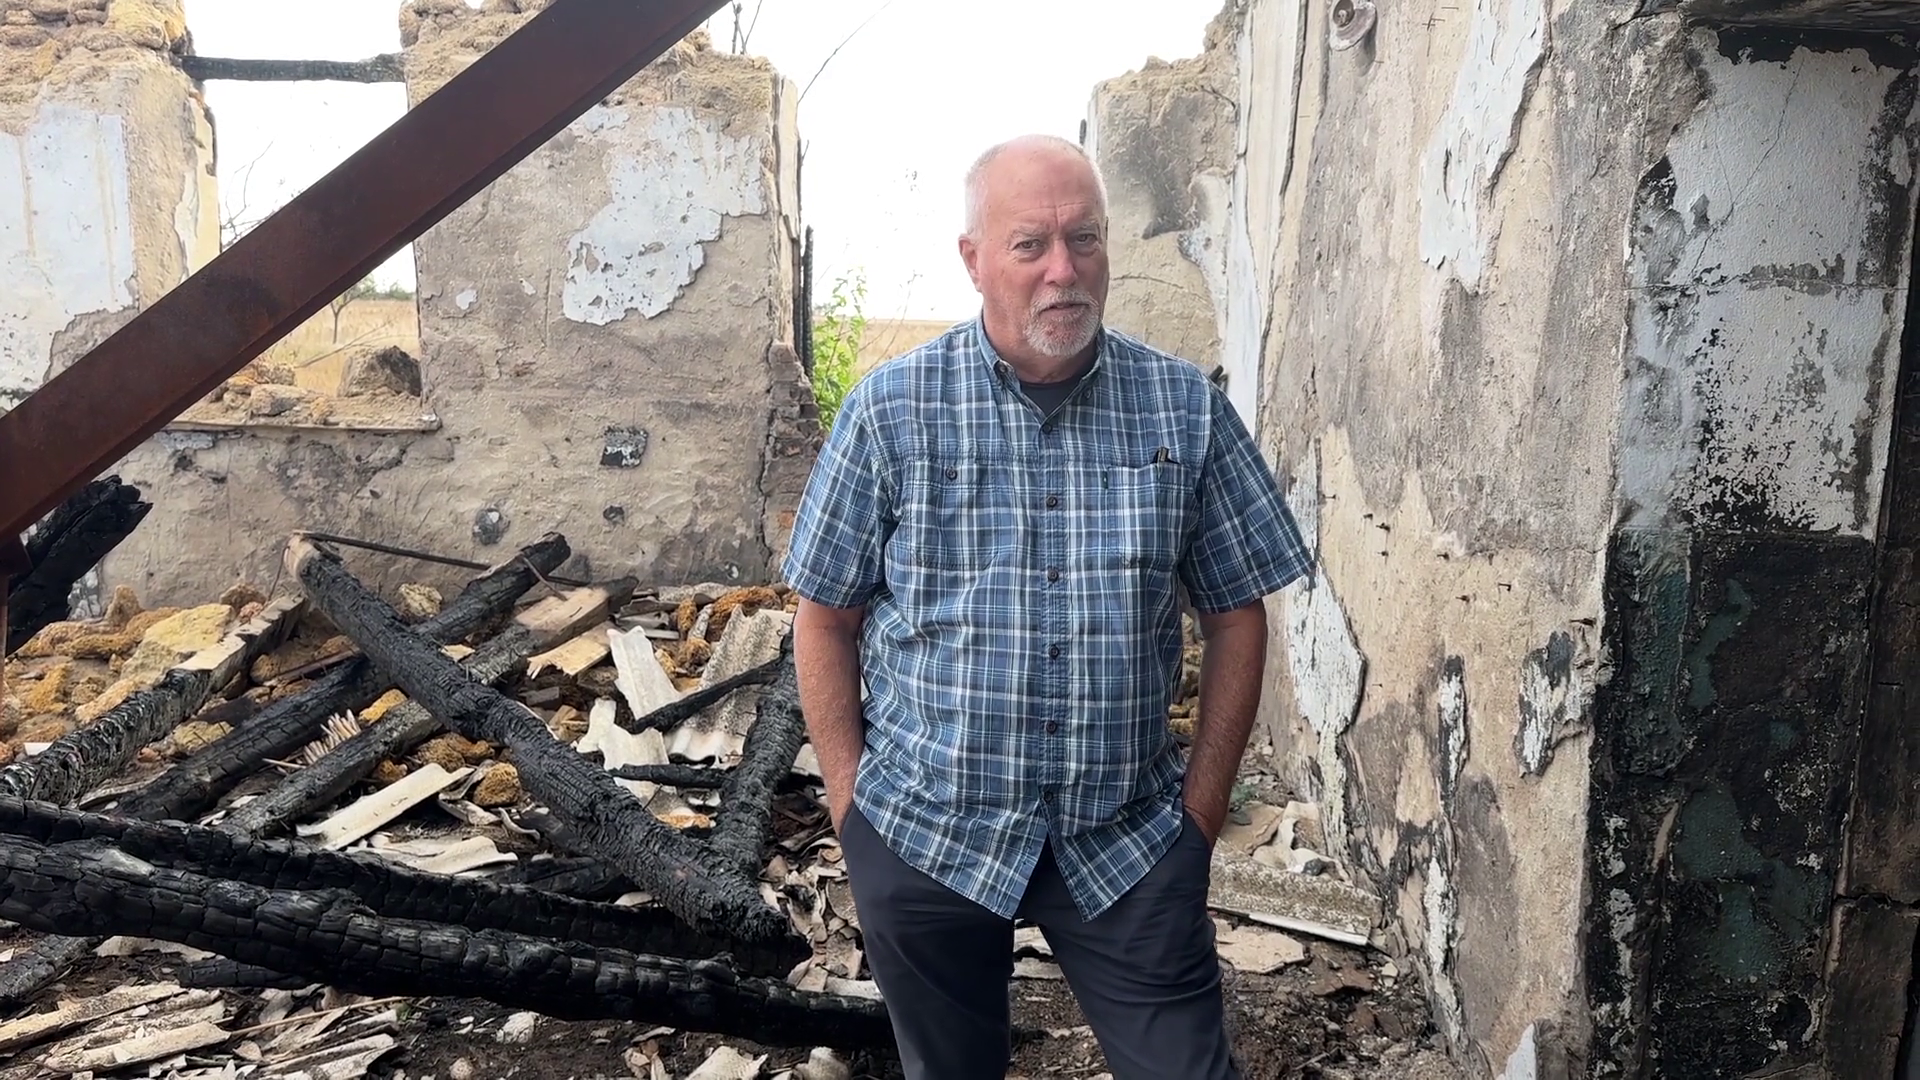 Families living in a nearby village are rebuilding their lives in South Ukraine thanks to support from Christian charities like Mercy Projects